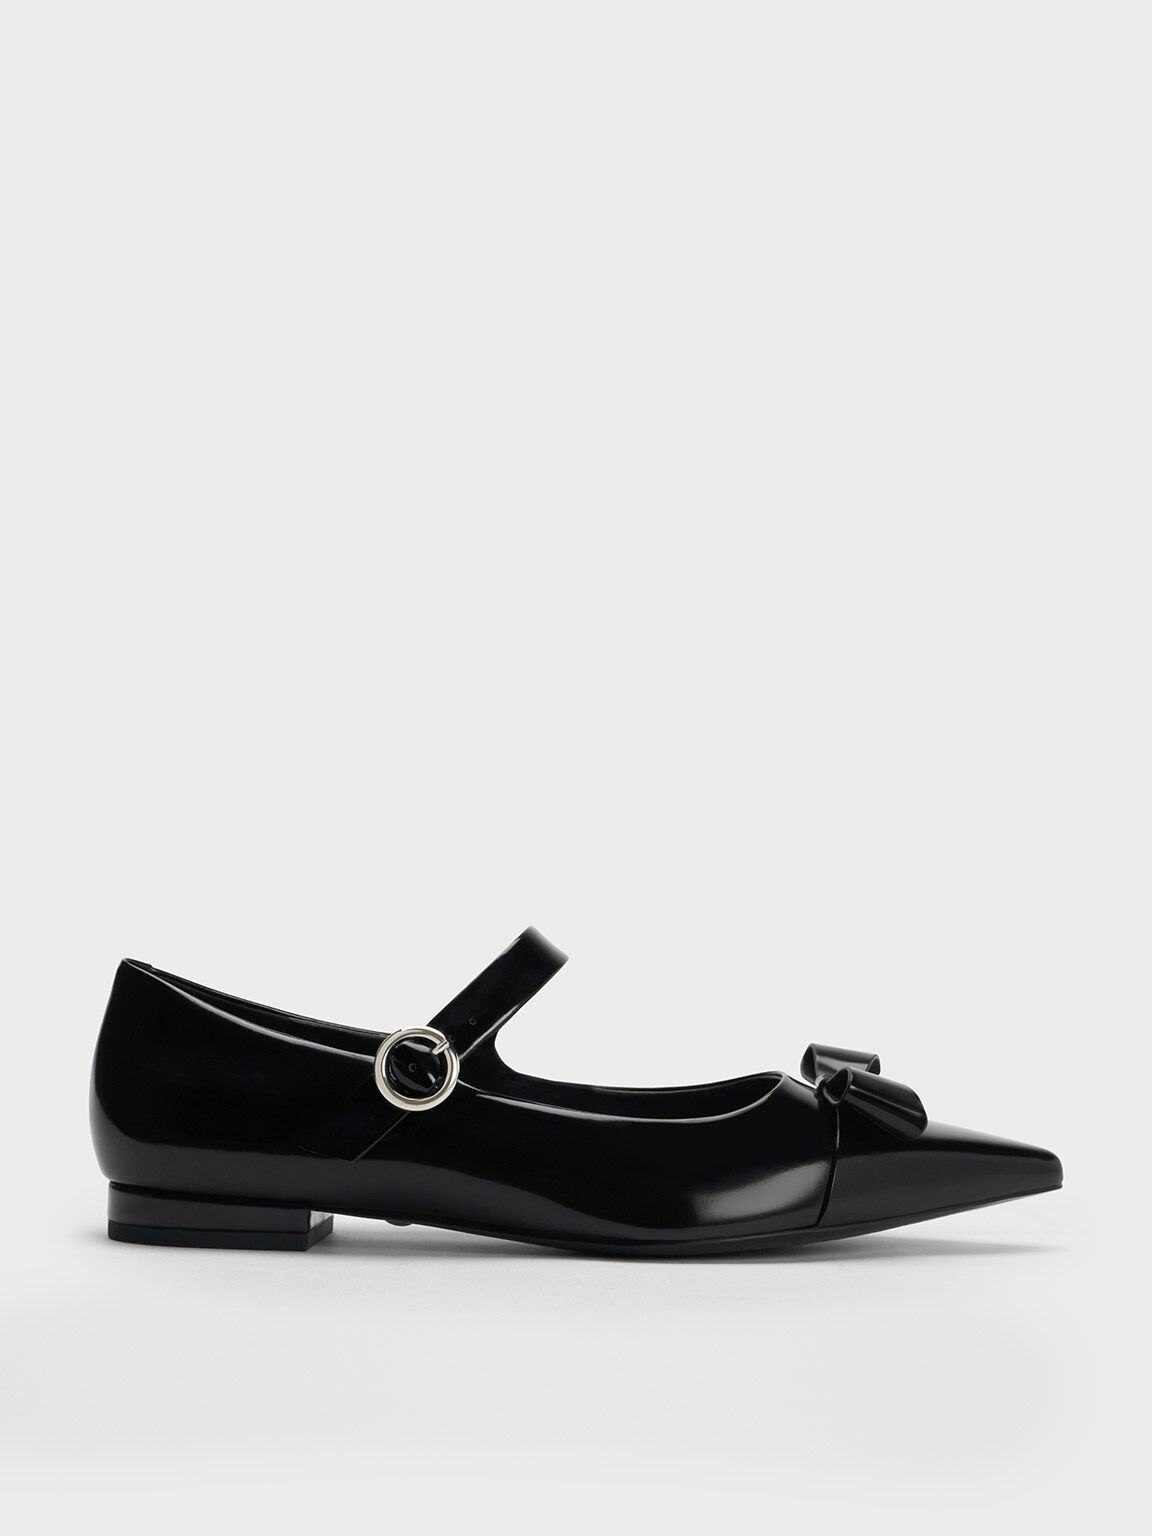 CHARLES & KEITH Shoes for Women - Vestiaire Collective